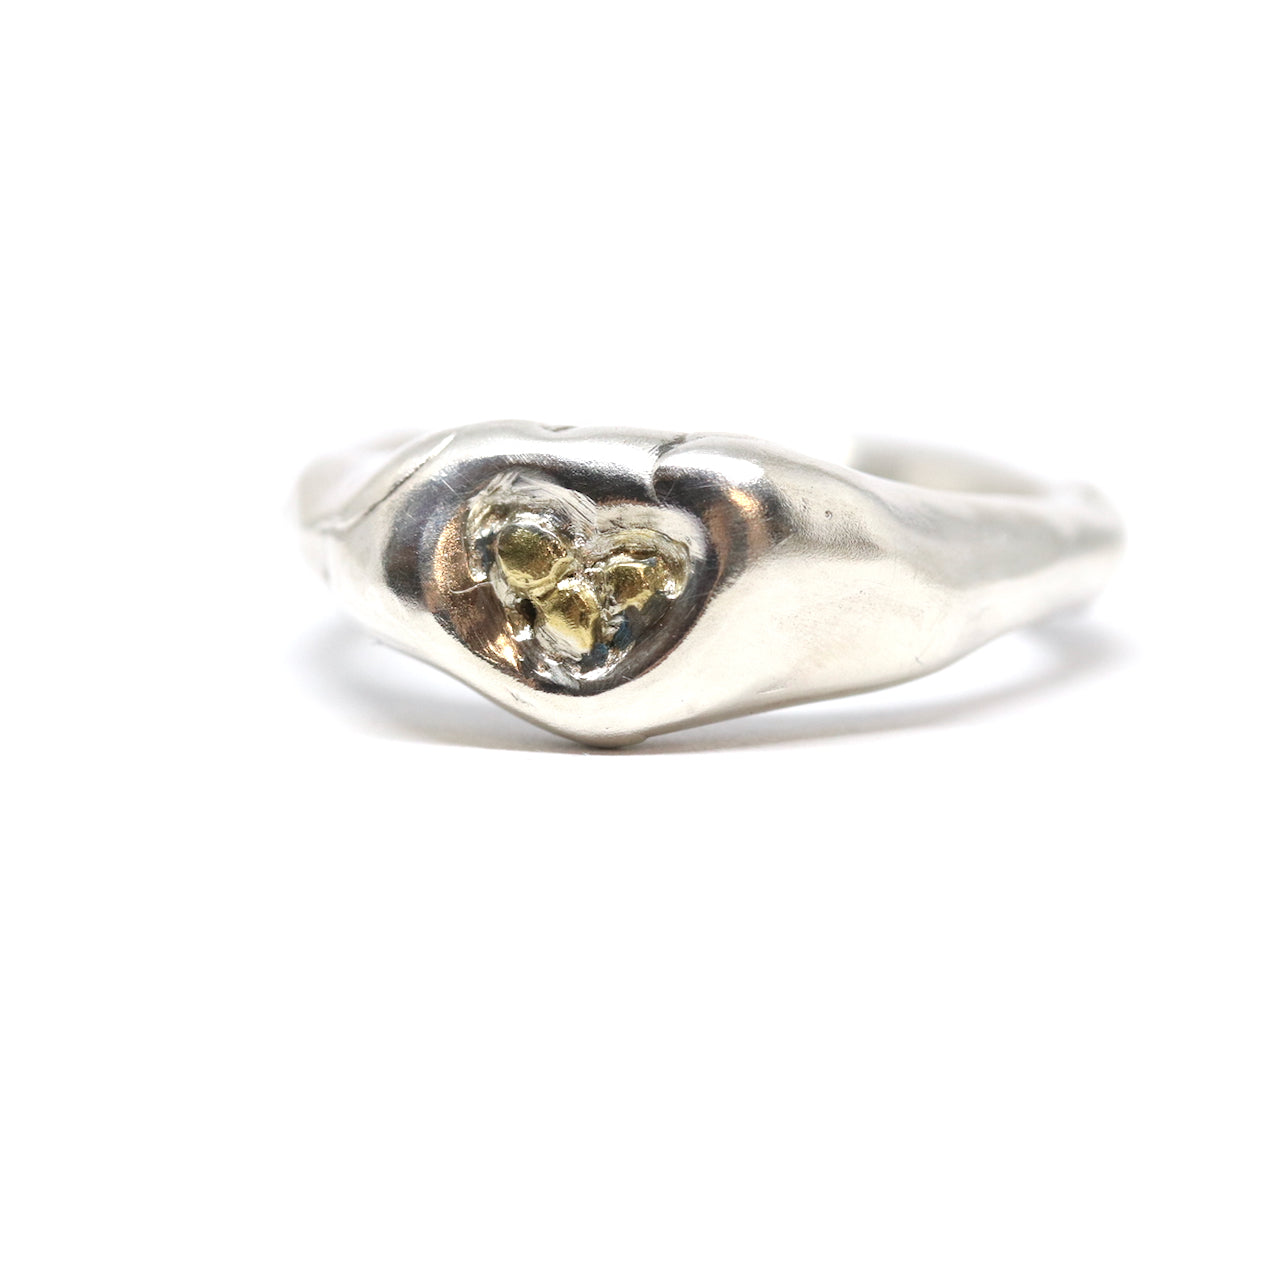 A sterling silver ring with 24k gold. This ring was hand made in Wānaka, New Zealand by designer and jeweller Briar Hardy-Hesson.